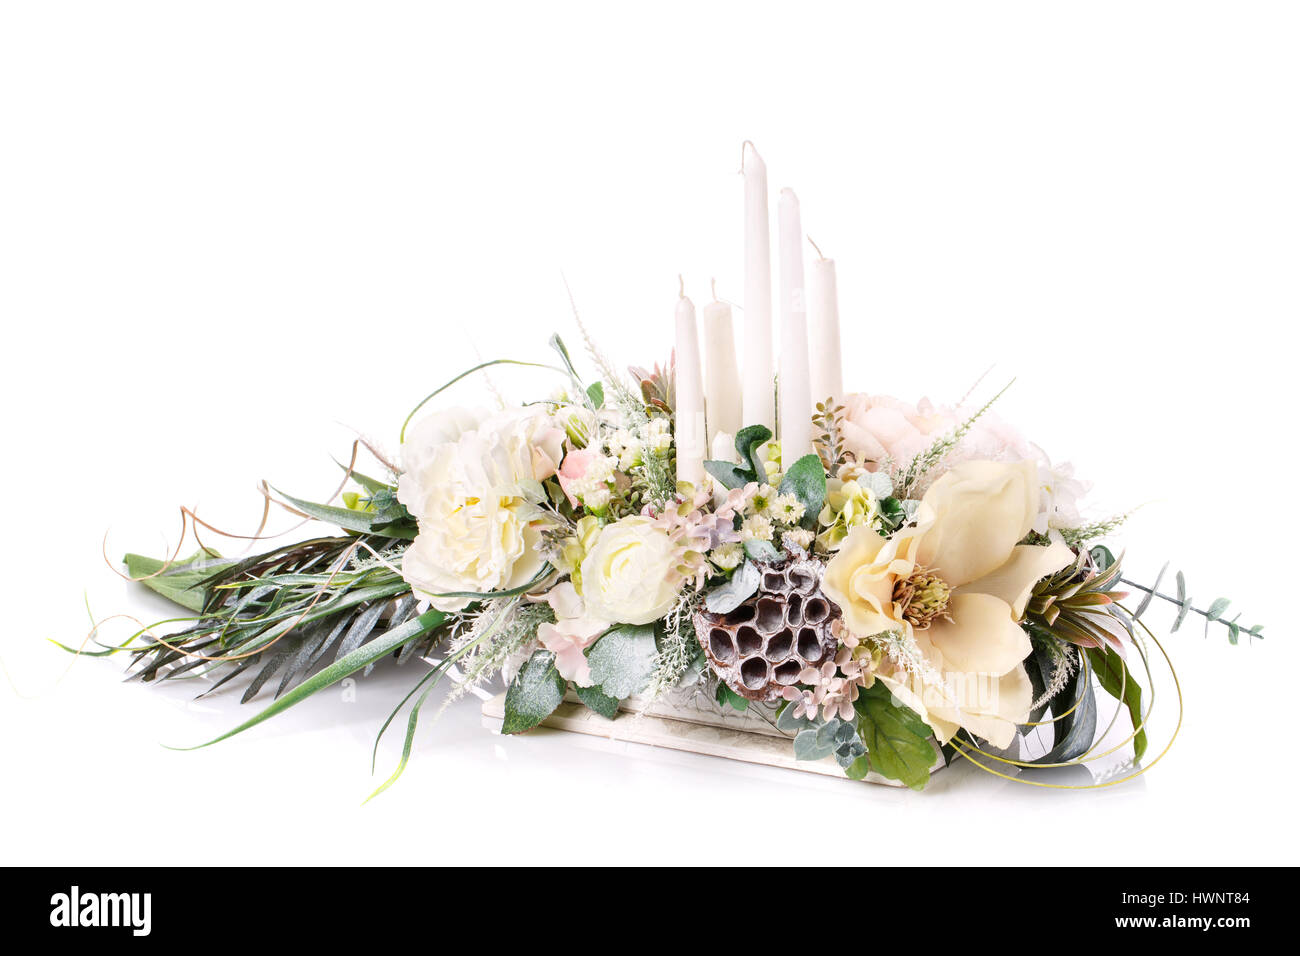 composition of flowers and candles to decorate Stock Photo